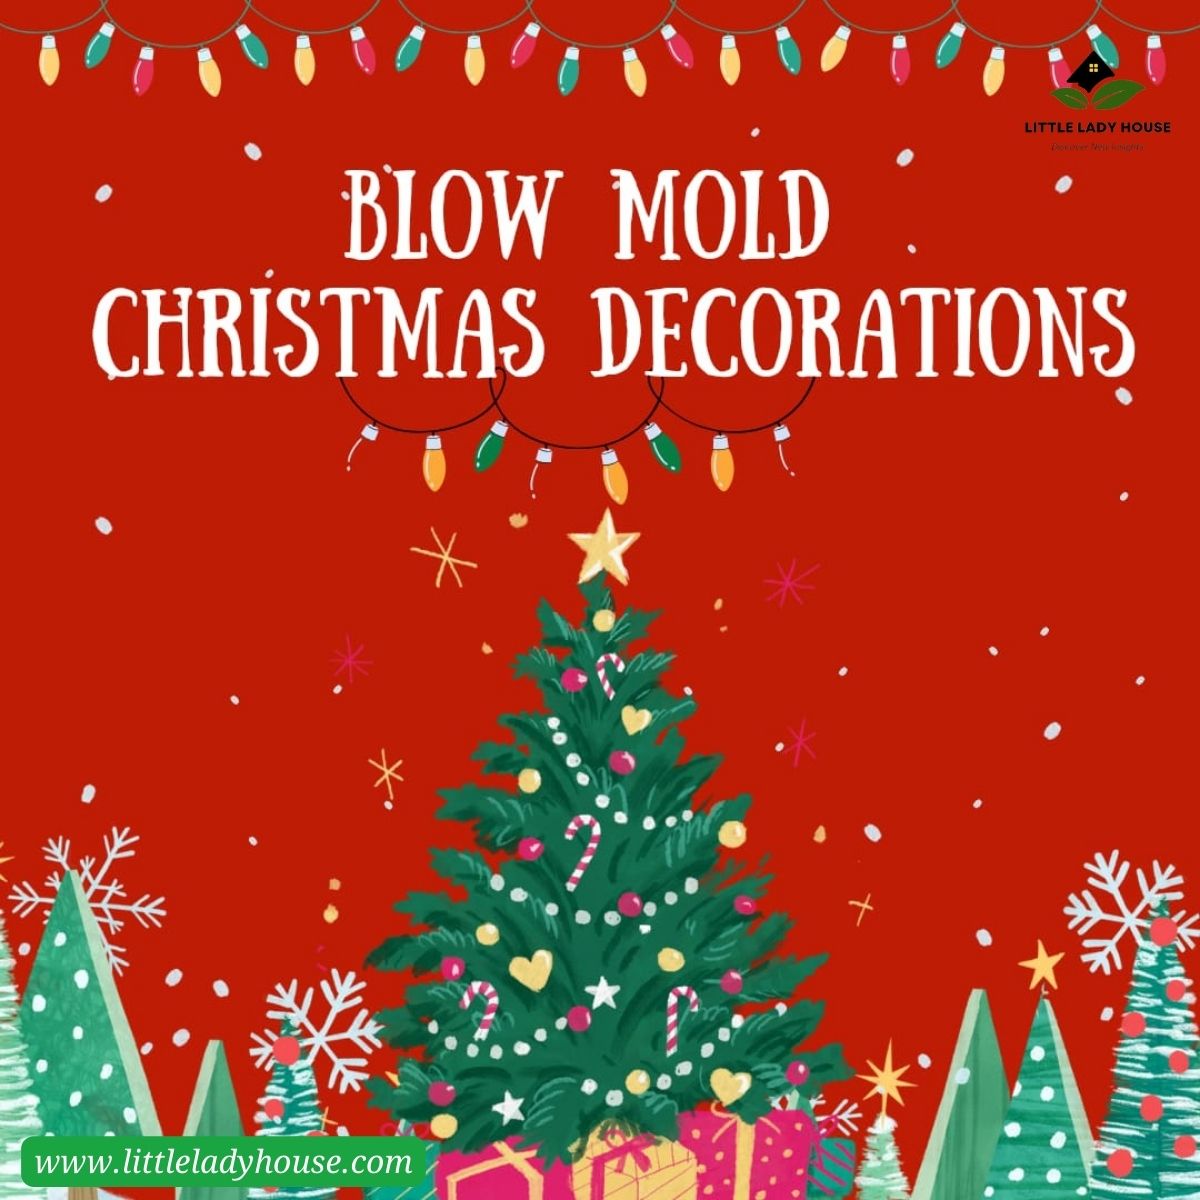 Blow Mold Christmas Decorations for Sale in Beautiful Locations